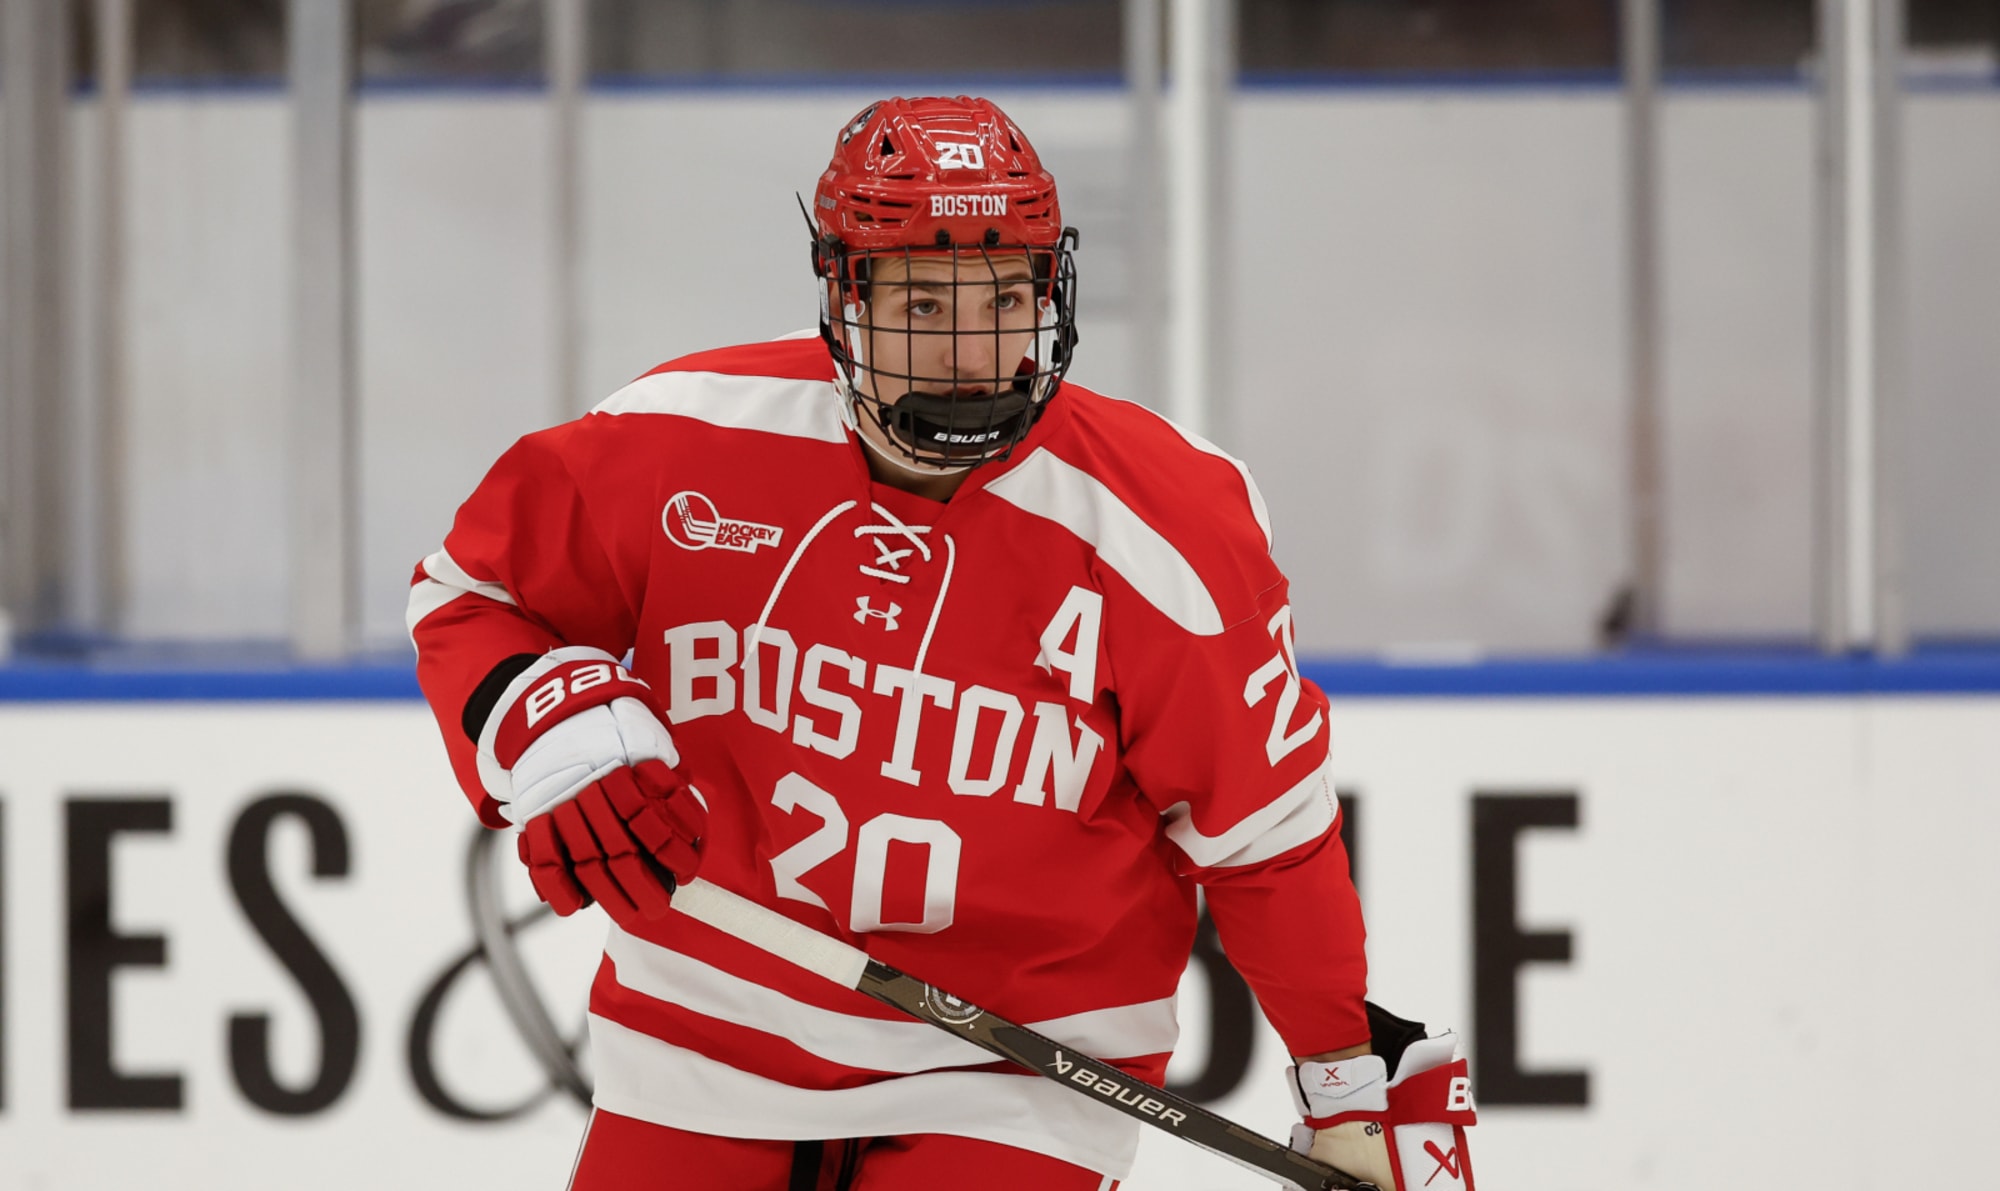 Boston University Terriers Fall to the Bentley Falcons